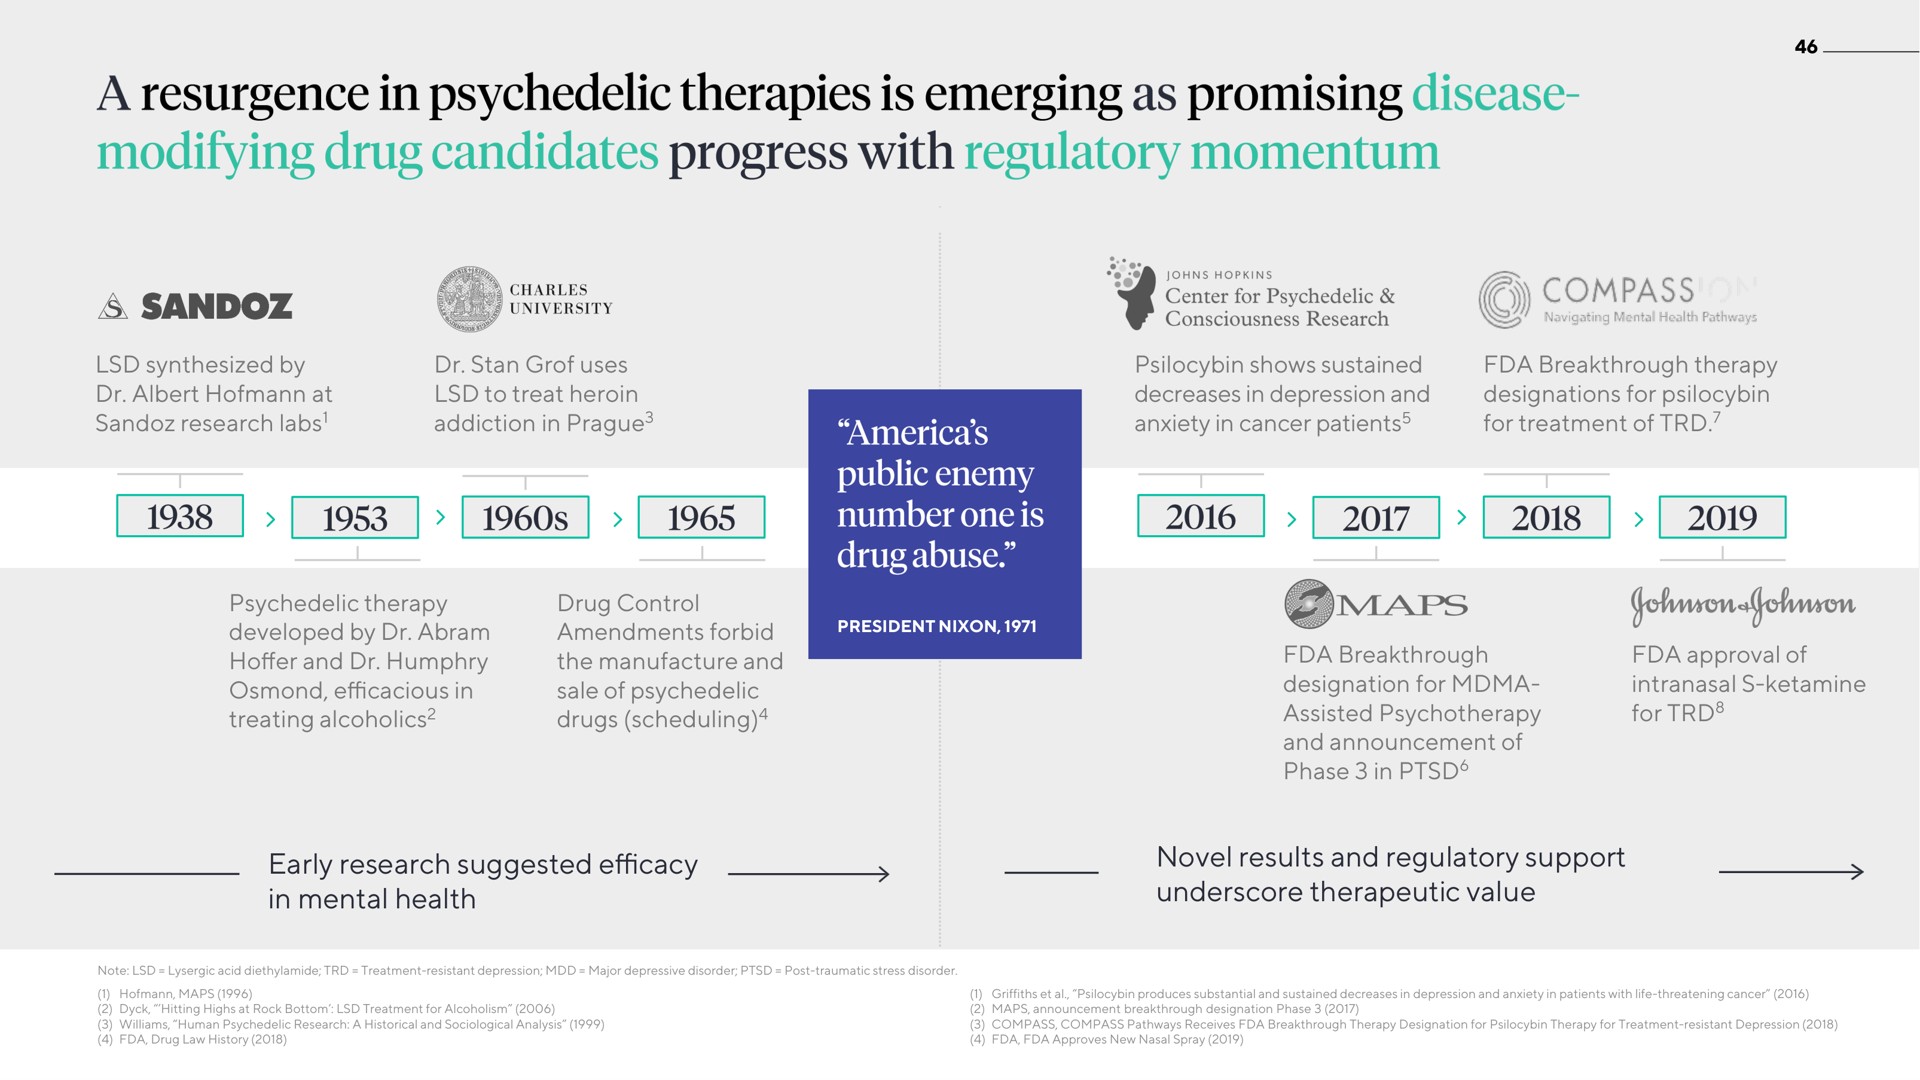 early research suggested in mental health novel results and regulatory support underscore therapeutic value a resurgence therapies is emerging as promising disease modifying drug candidates progress with momentum | ATAI